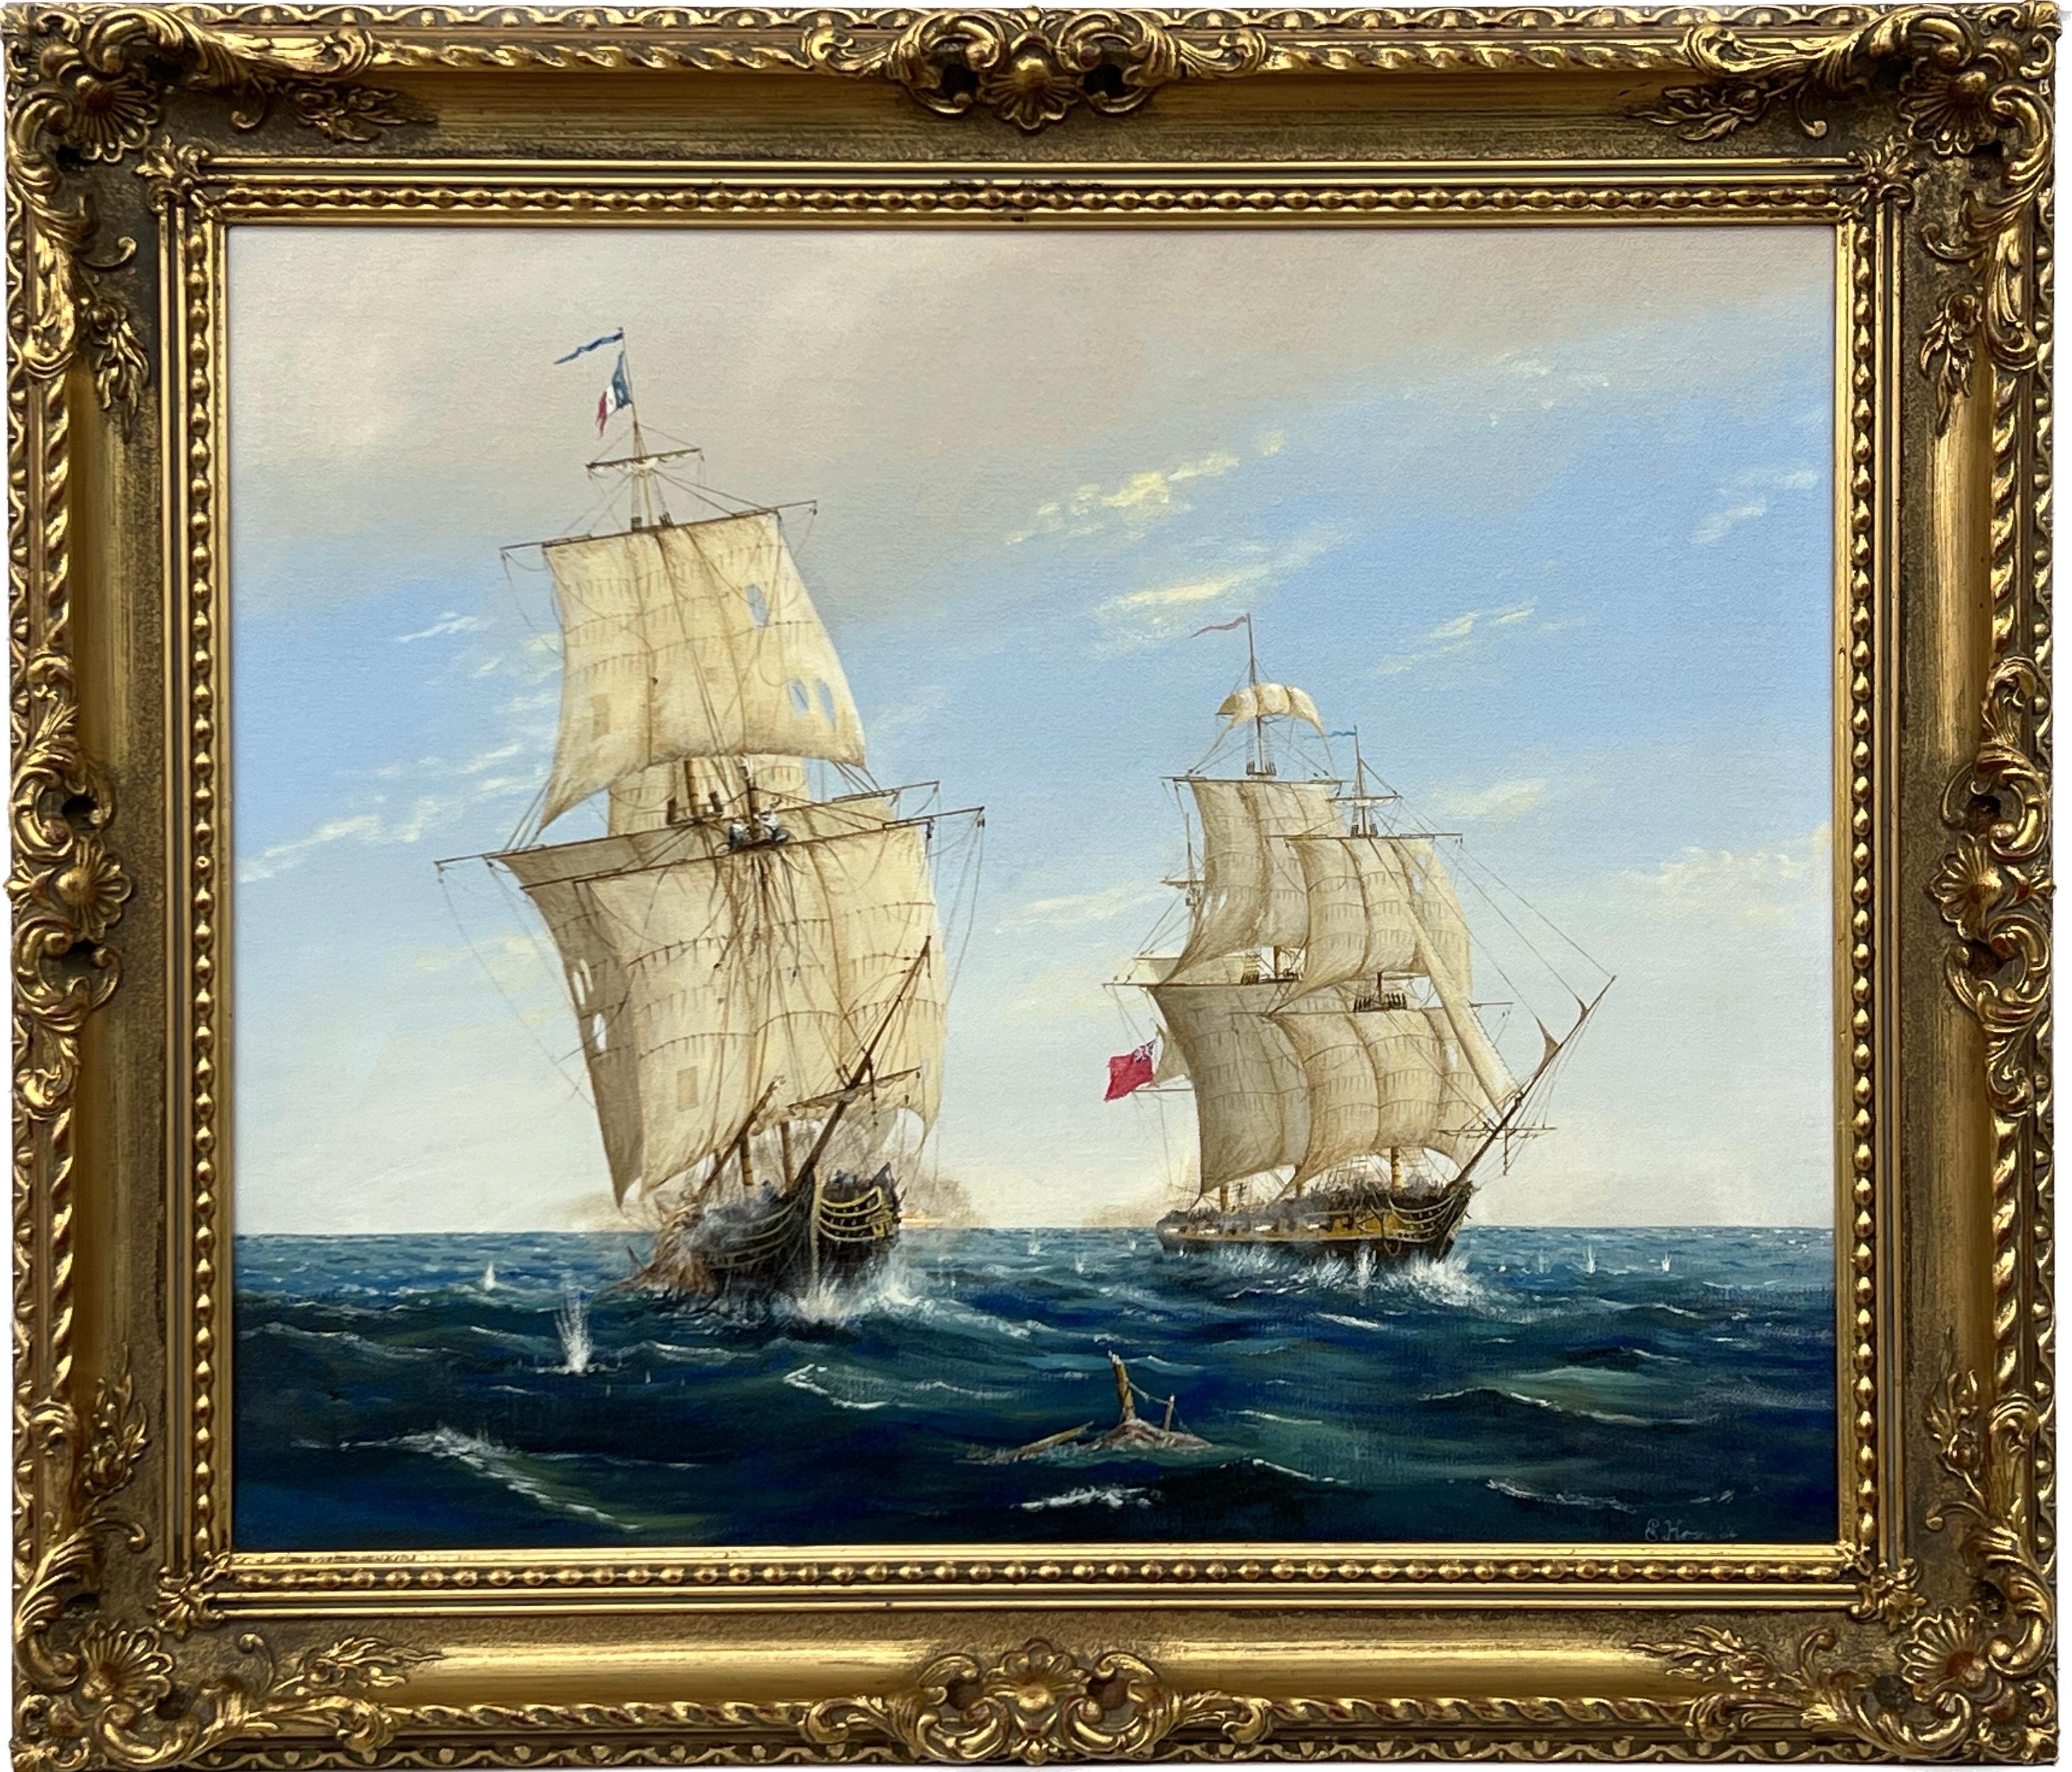 Edward Hersey Figurative Painting - Nautical Maritime Seascape Painting of Naval Battle French & British War Ships